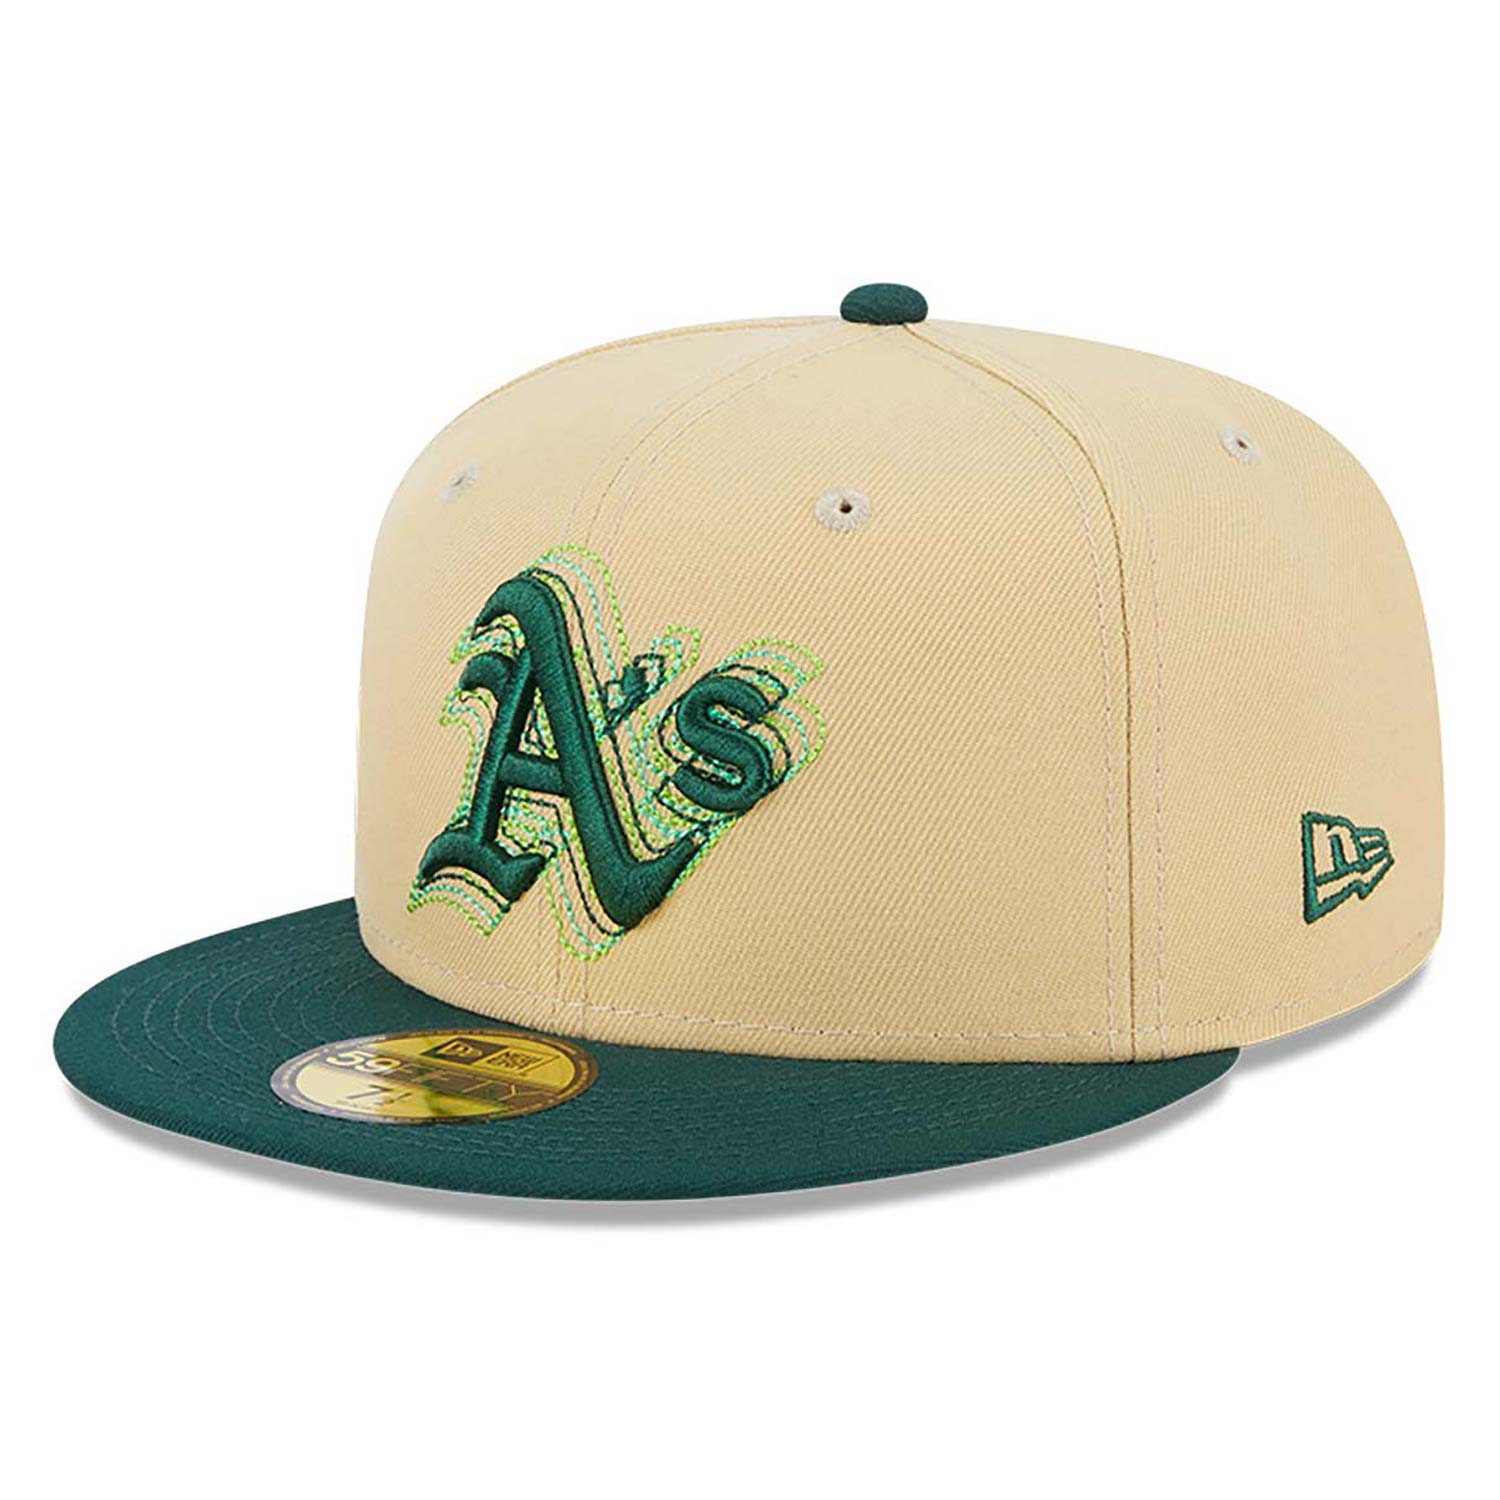 Oakland Athletics Illusion Stone 59FIFTY Fitted Cap